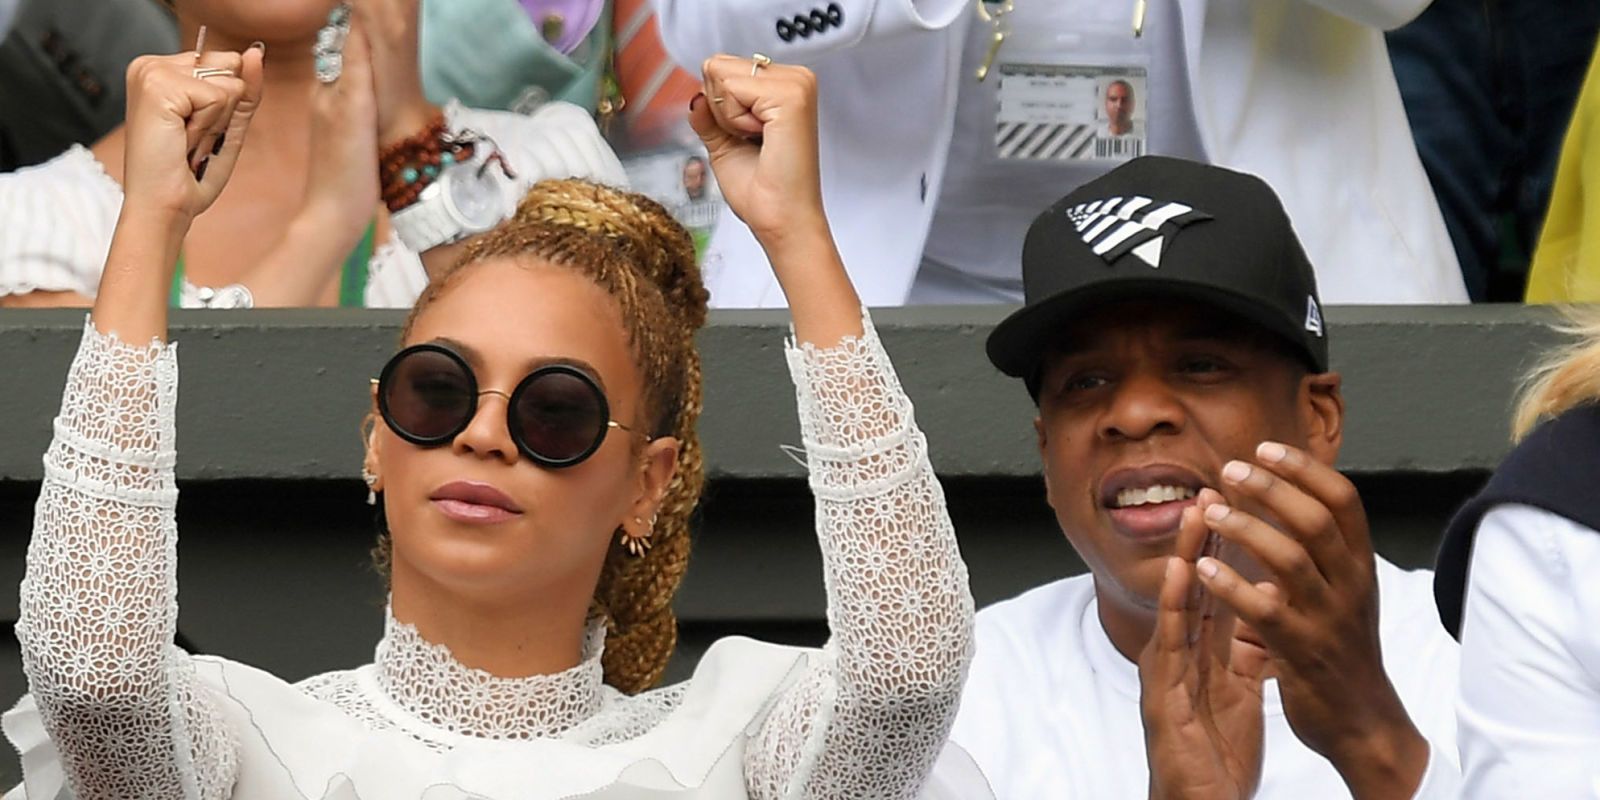 If You're Going to Match Your Partner's Clothes, Do It Like Jay and Bey